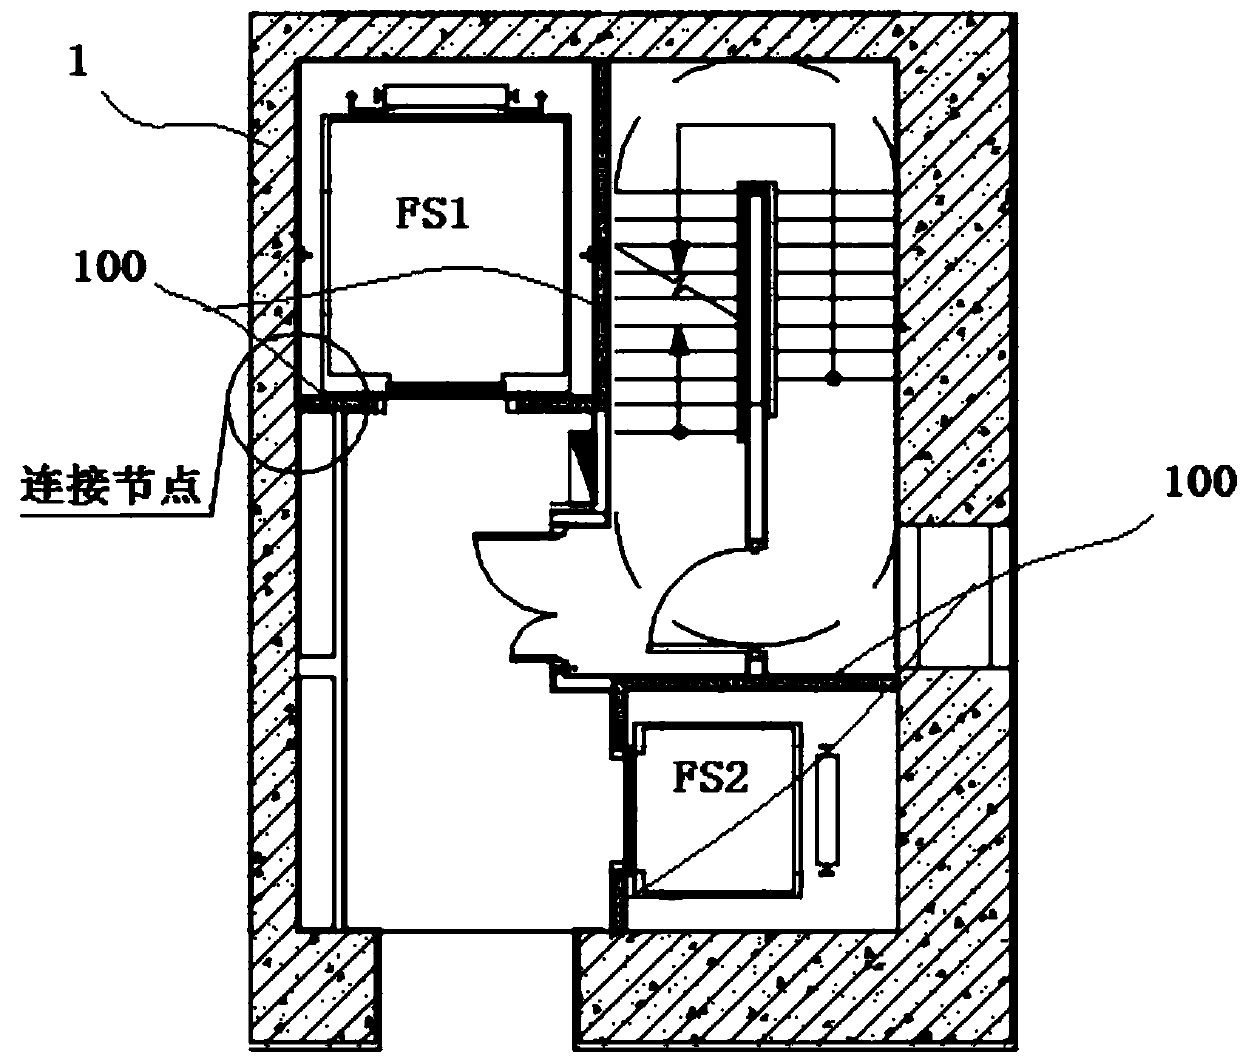 Construction method used for superhigh building fire elevator shaft wall and reinforced concrete wall